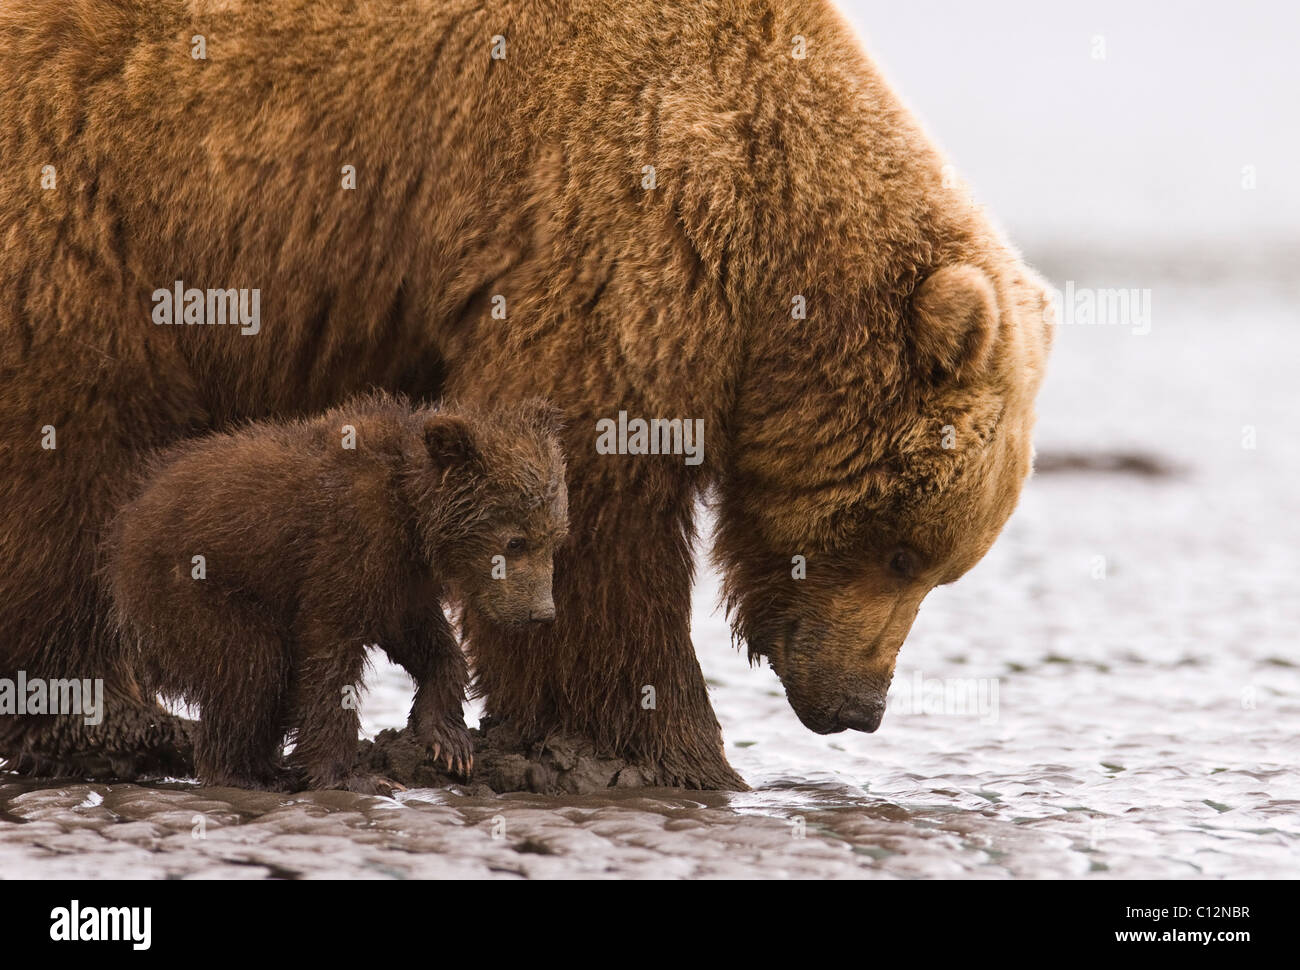 A brown bear mother teaches her cub to dig for razor clams at low tide on the beach. Stock Photo